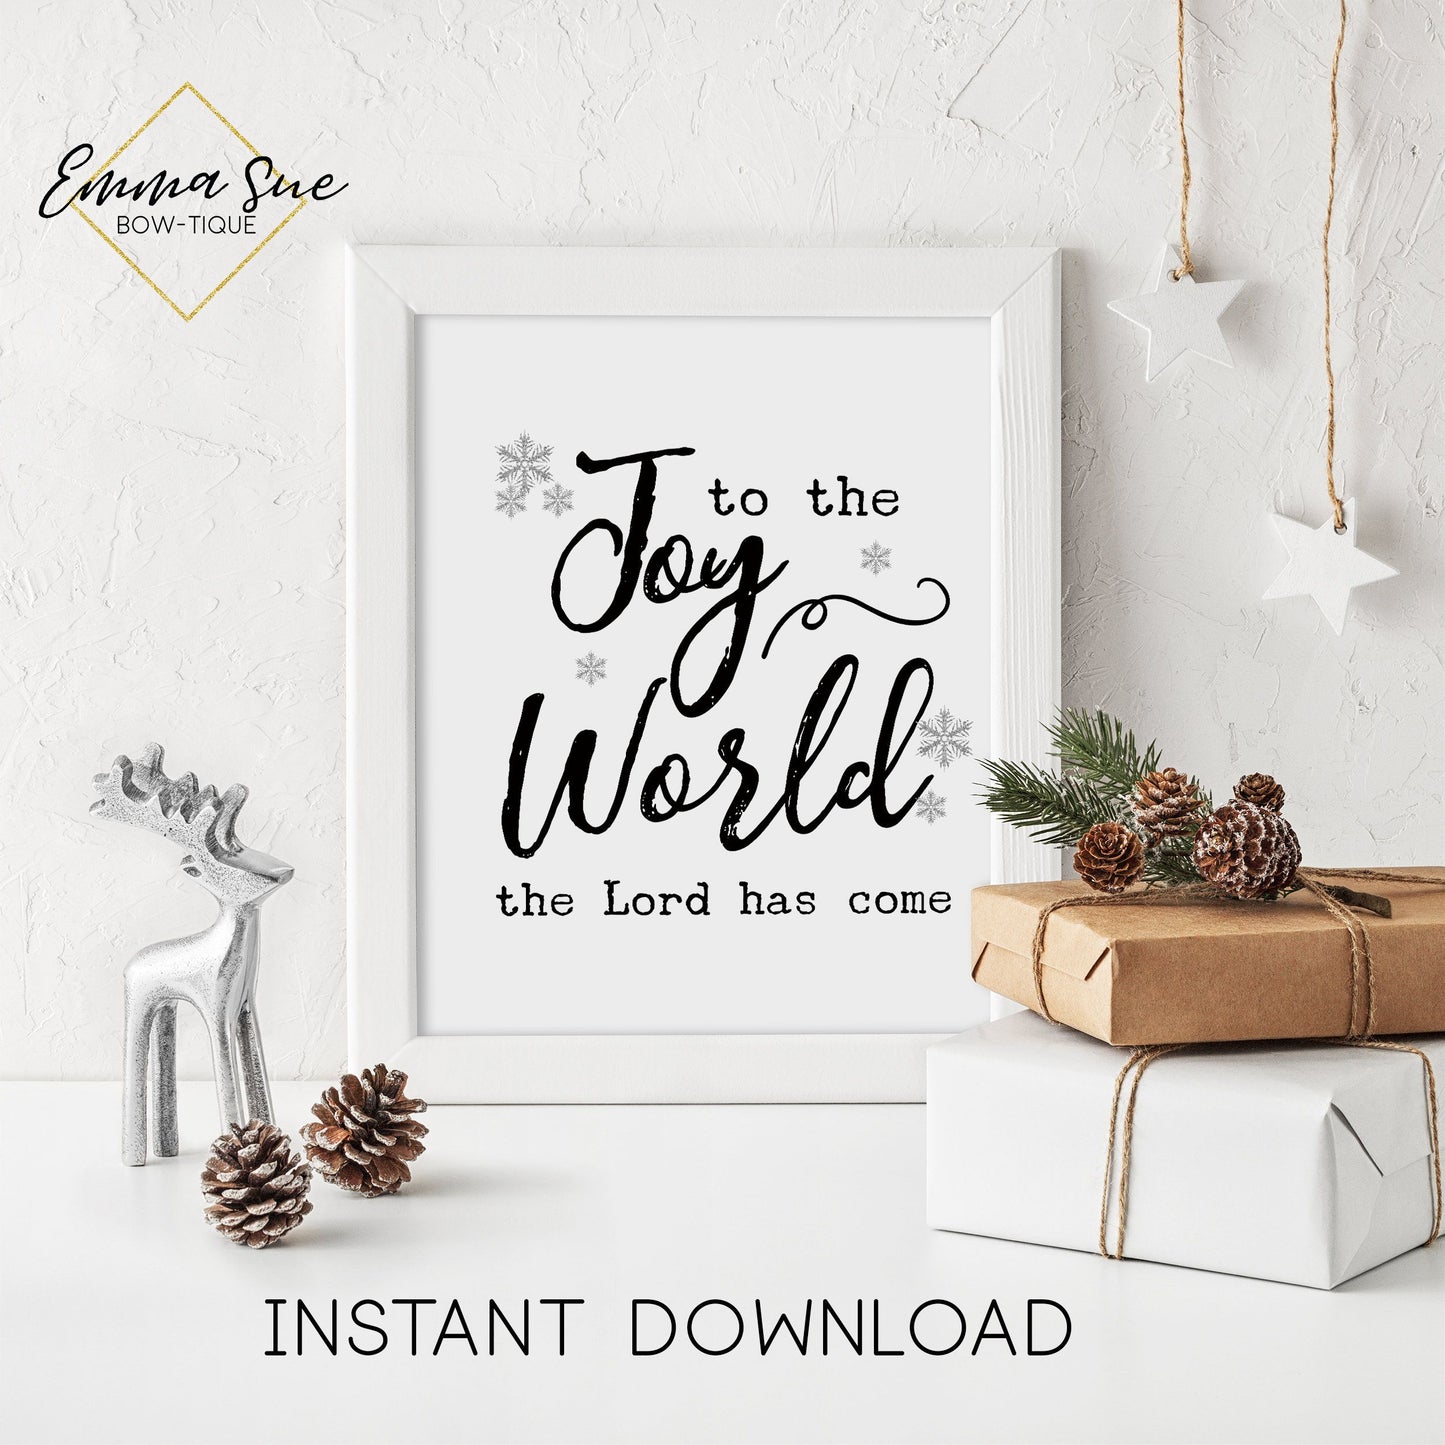 Joy to the World the Lord has come - Jesus Christmas Decor Printable Sign Farmhouse Style  - Digital File